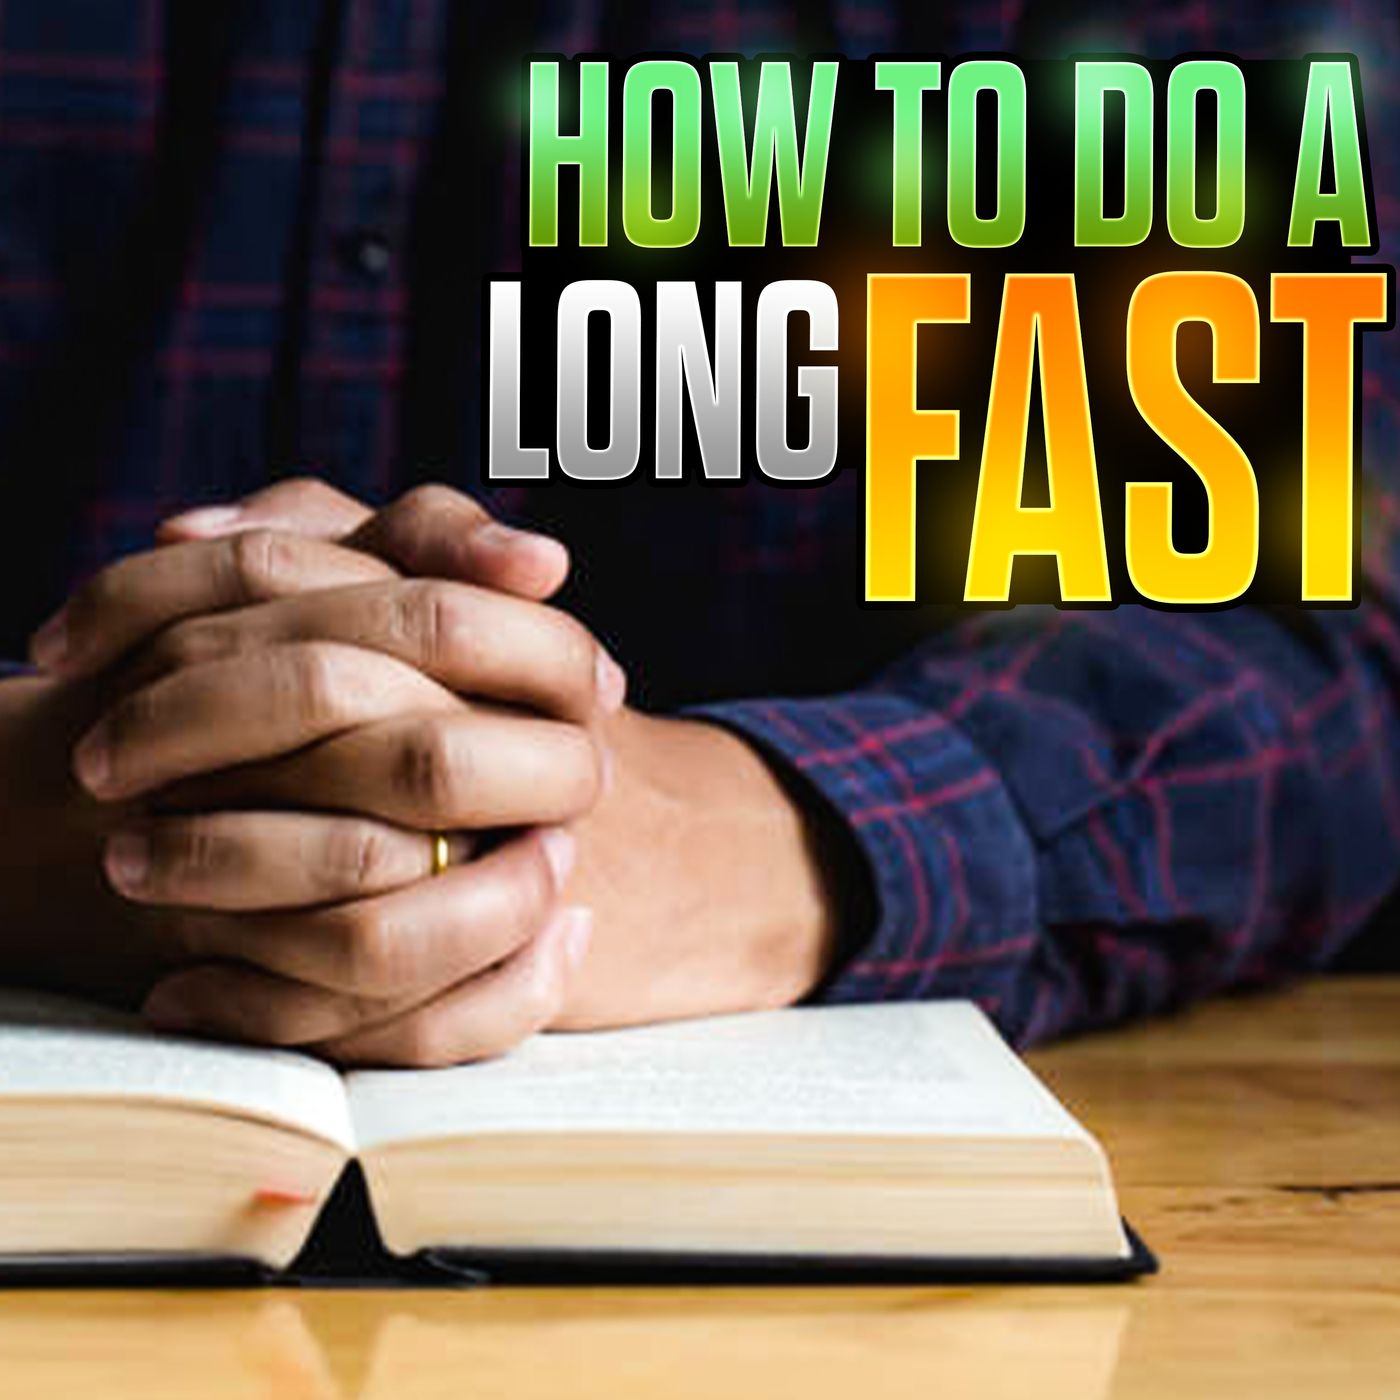 How to do a Long Fast the Right Way